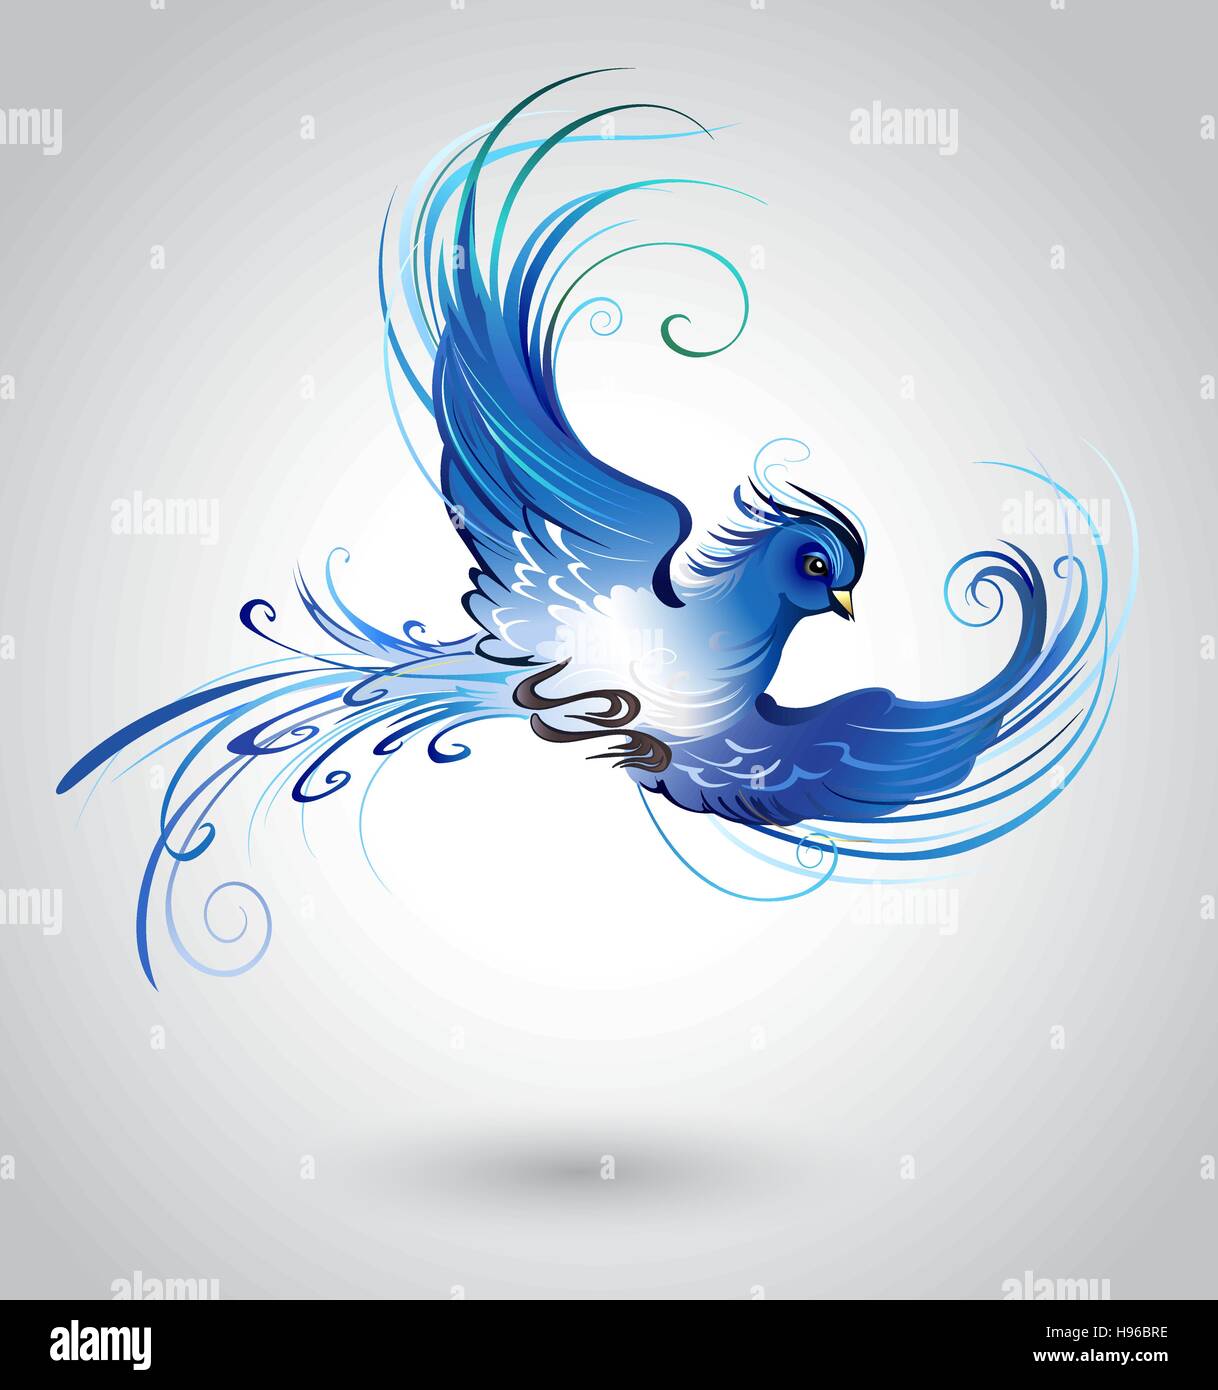 artistically painted, flying blue bird on a light background. Stock Vector